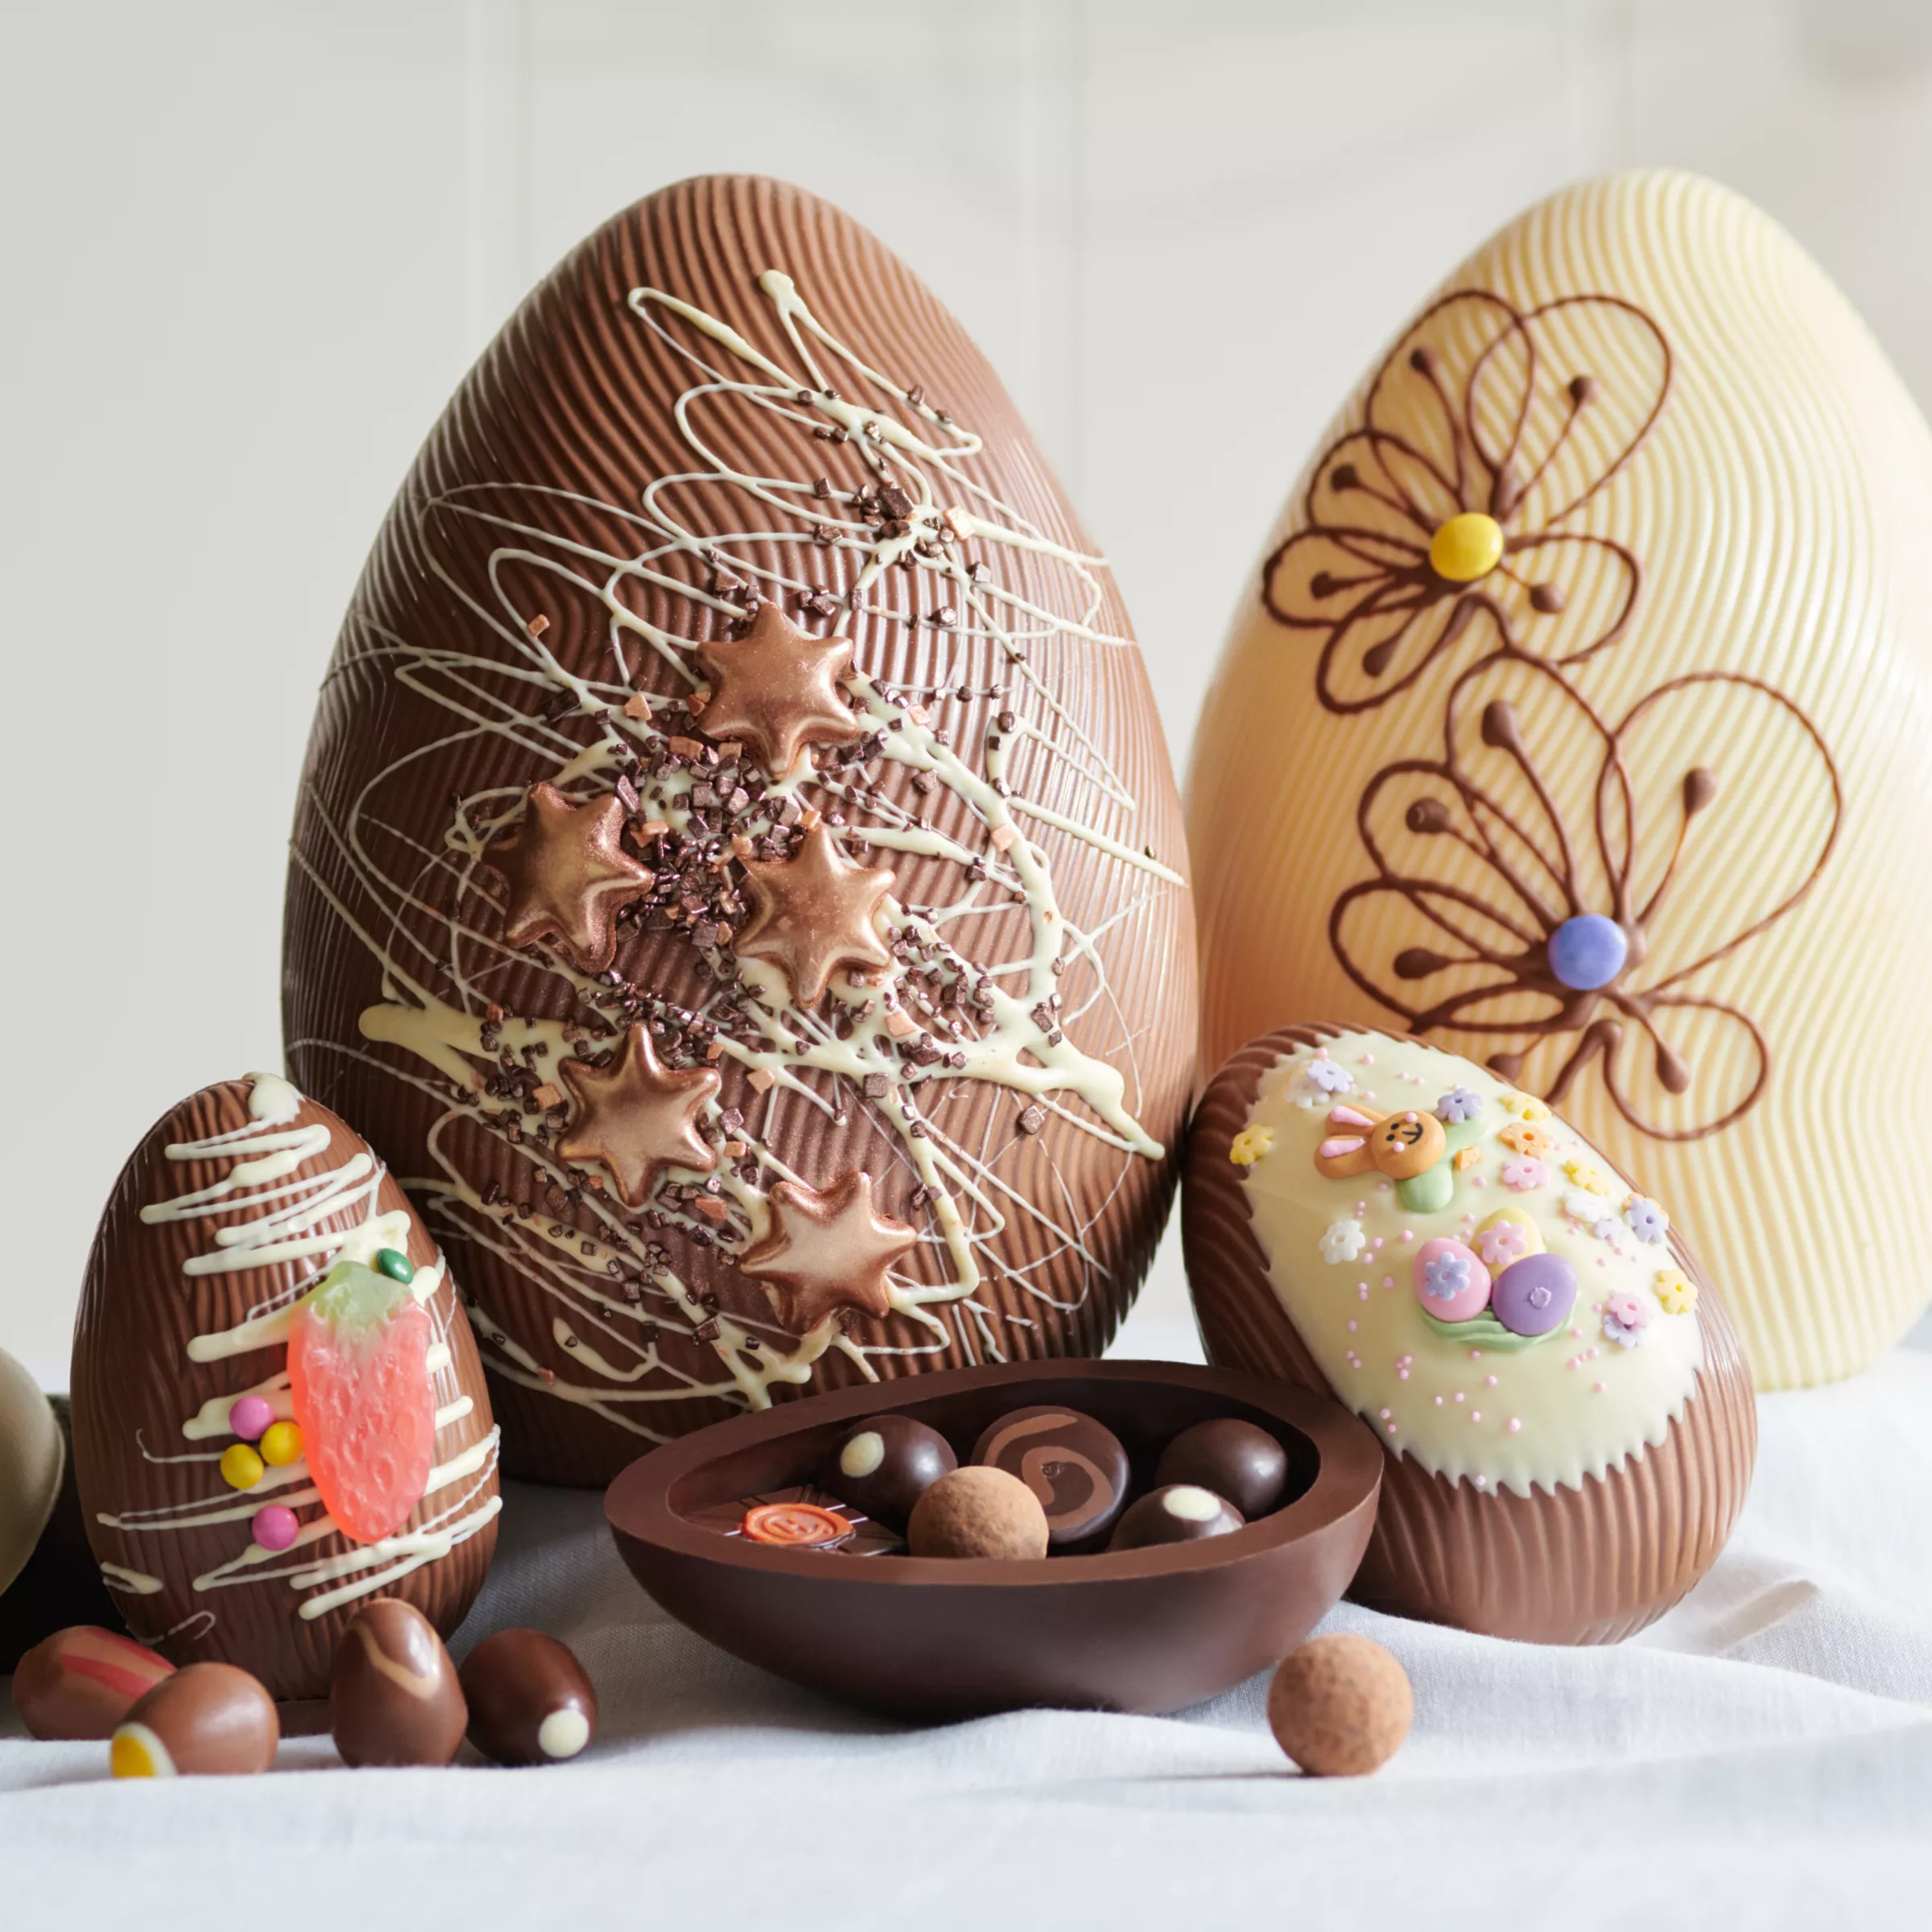 The Tradition of Easter Eggs